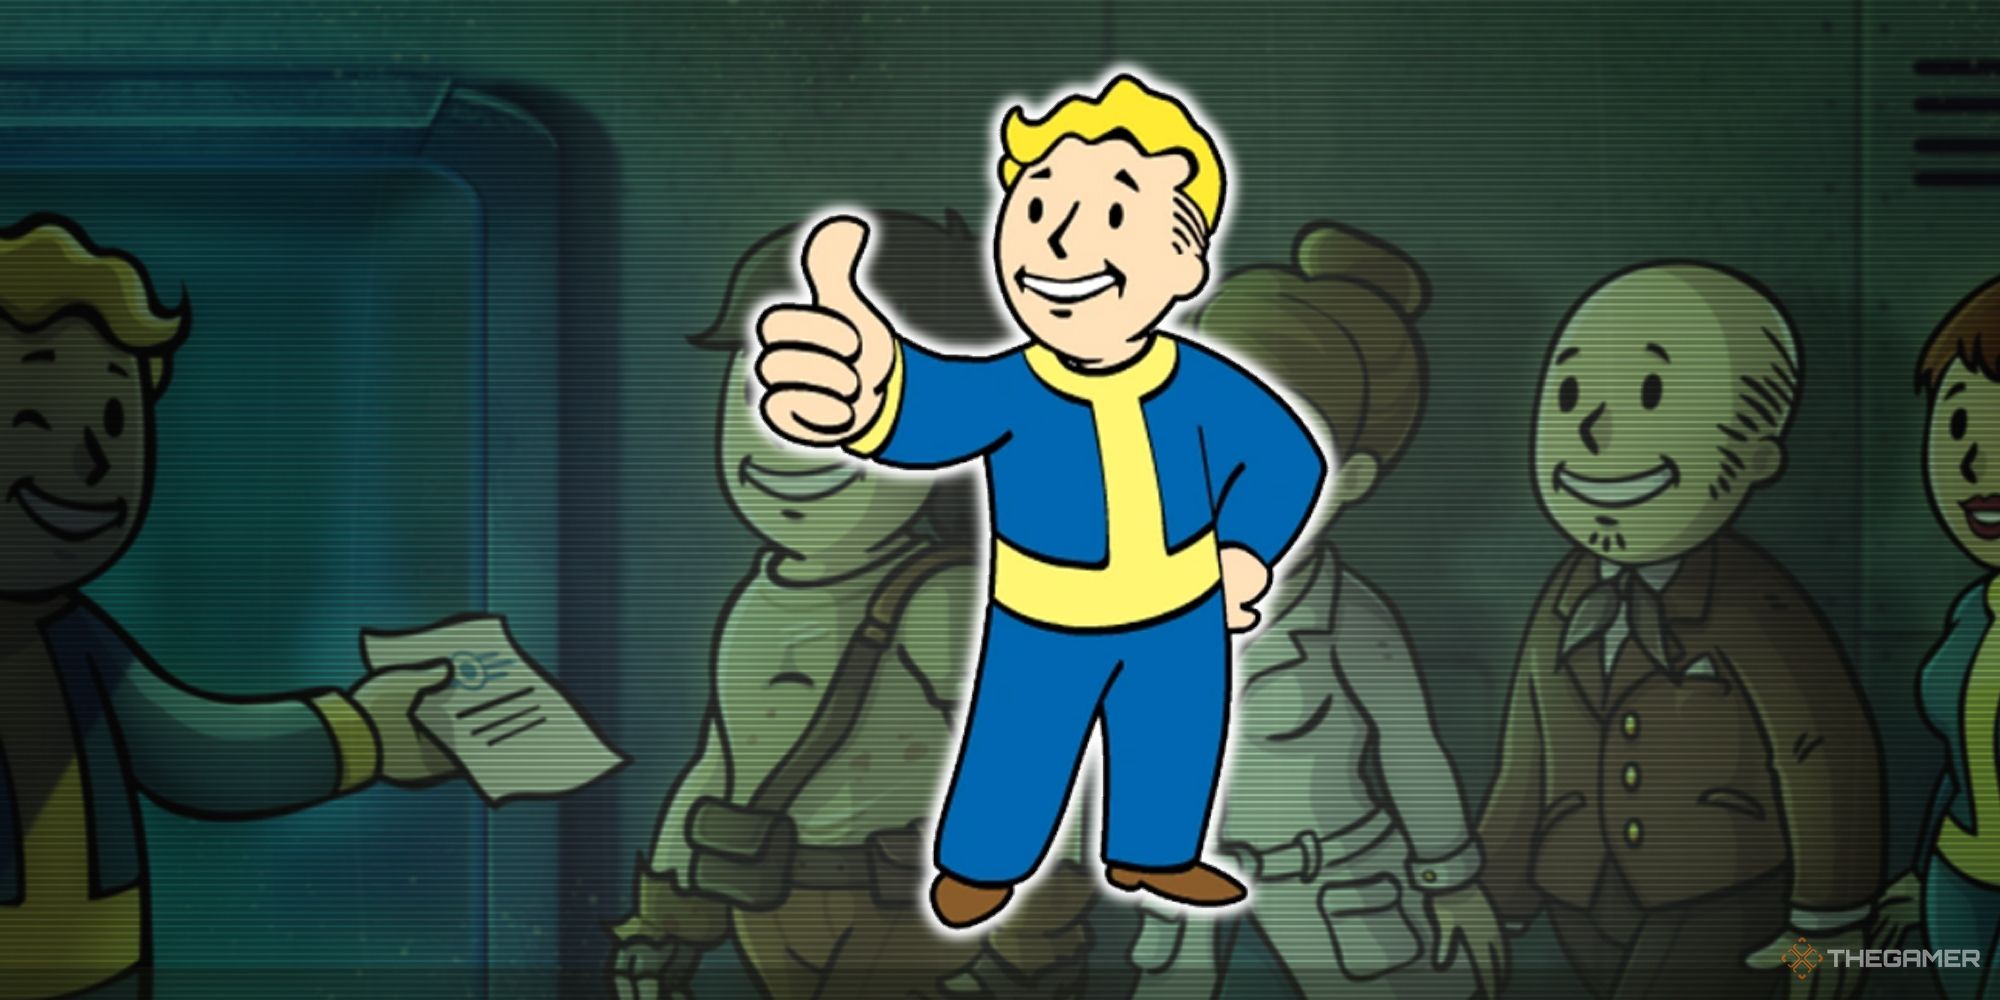 Fallout Shelter dwellers entering vault with Vault Boy overlay